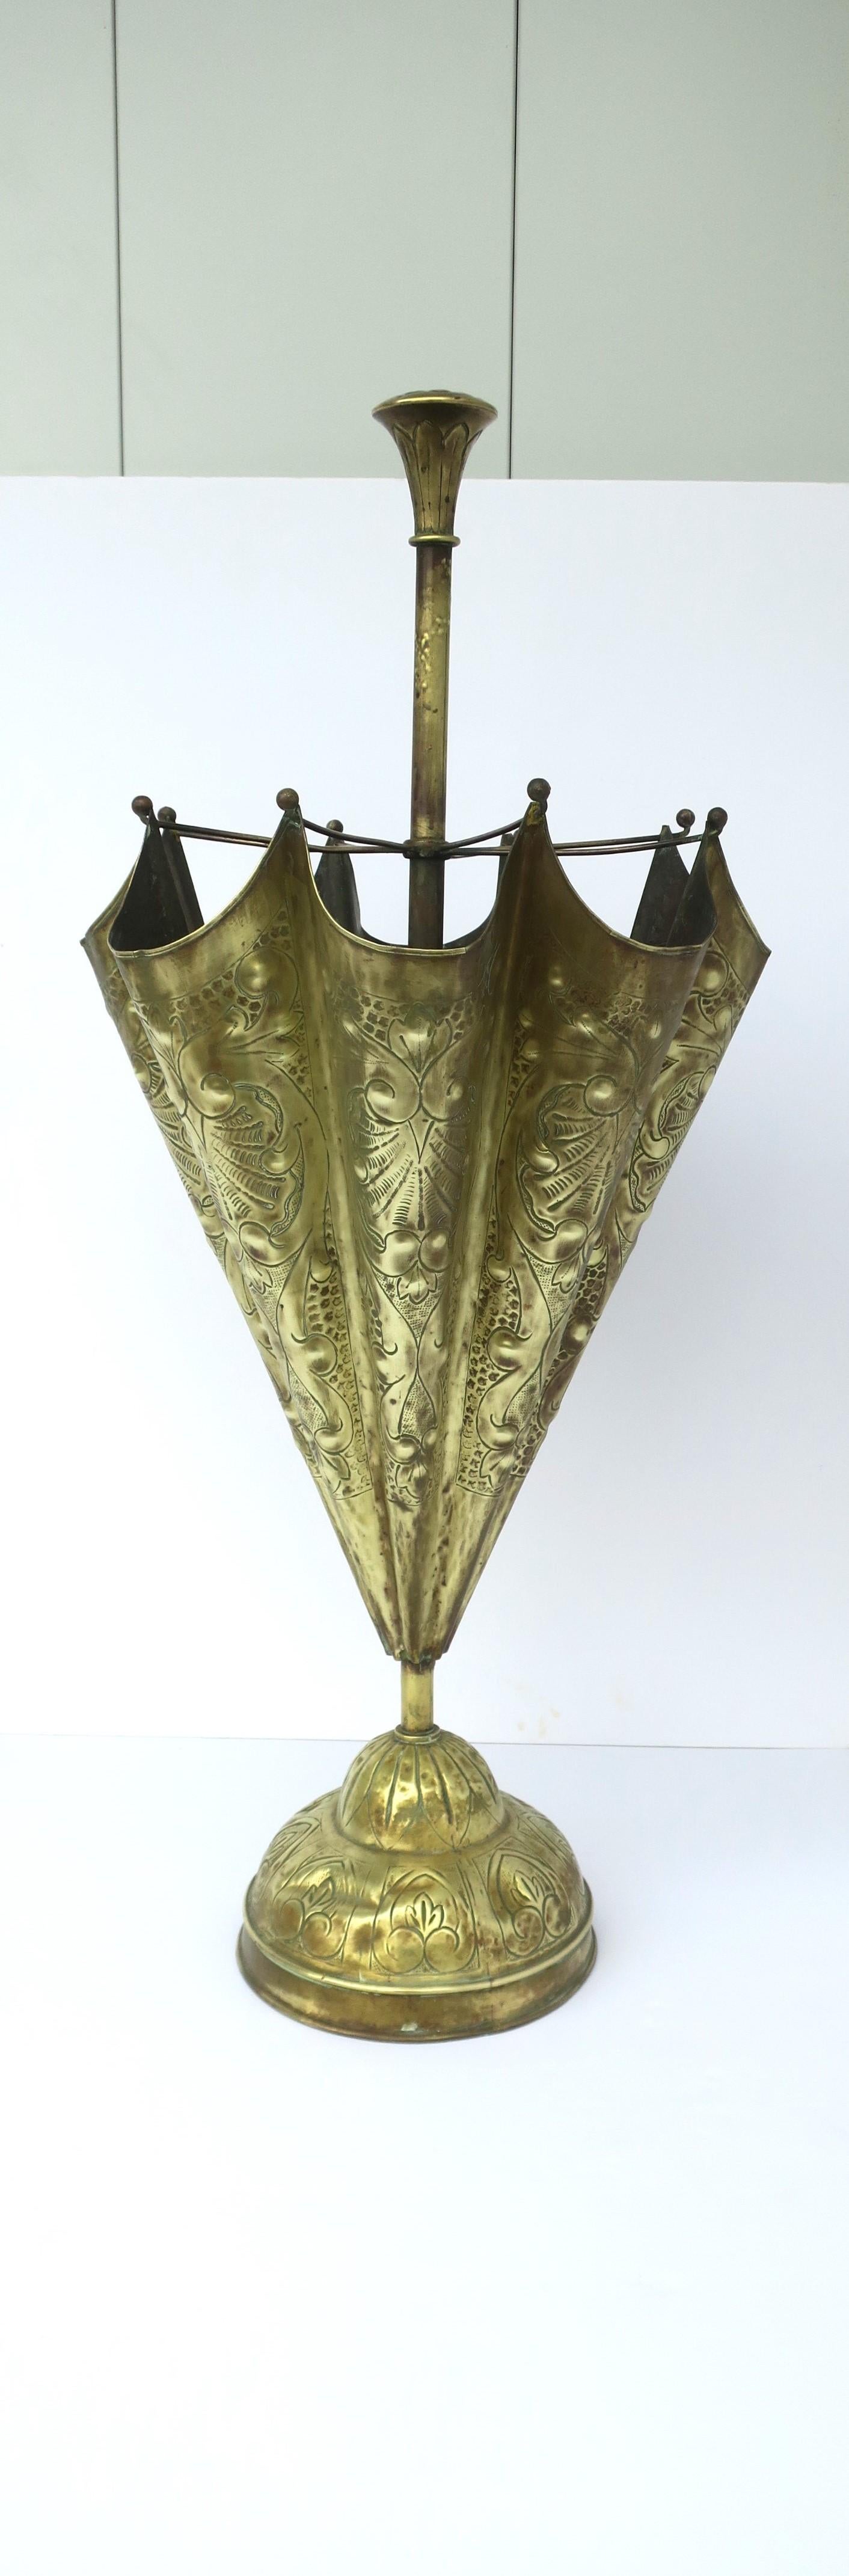 A beautiful brass umbrella holder stand in an 'Umbrella' shape with repousse design, circa mid-20th century. This is a 'wow' of an umbrella holder stand with its detailed 'Umbrella' design from top to bottom and grand scale. Piece is shown next to